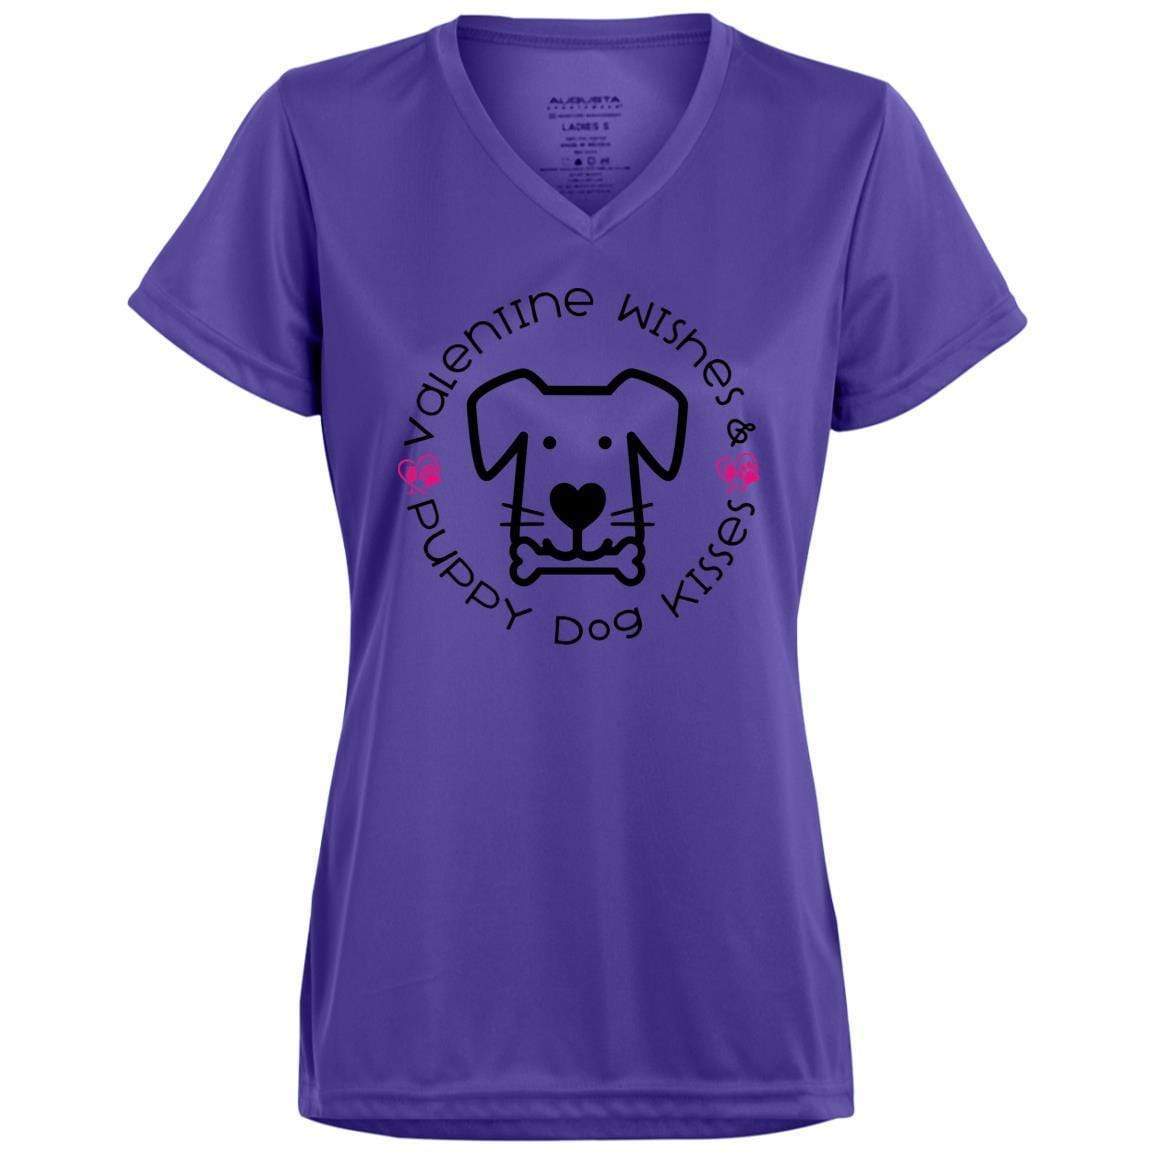 T-Shirts Purple / X-Small Winey Bitches Co 'Valentine Wishes and Puppy Dog Kisses" (Dog) Ladies' Wicking T-Shirt WineyBitchesCo